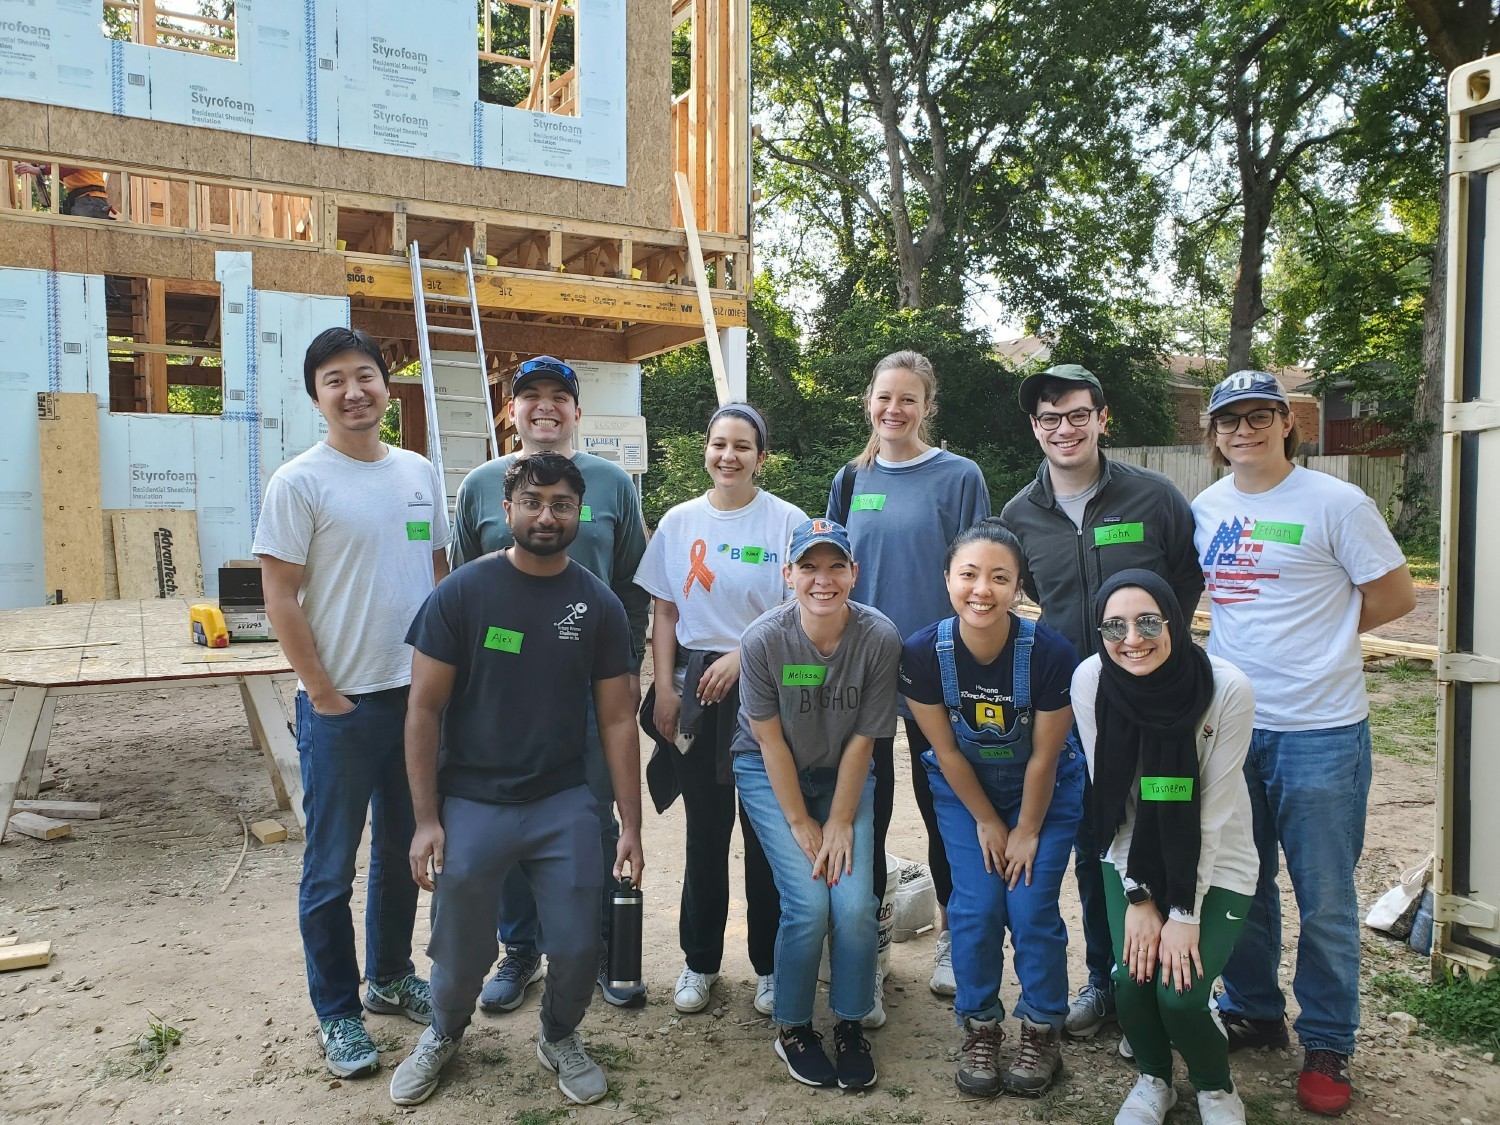 Beghou colleagues unite for community impact, dedicating a day to support Habitat for Humanity, a national non-profit.